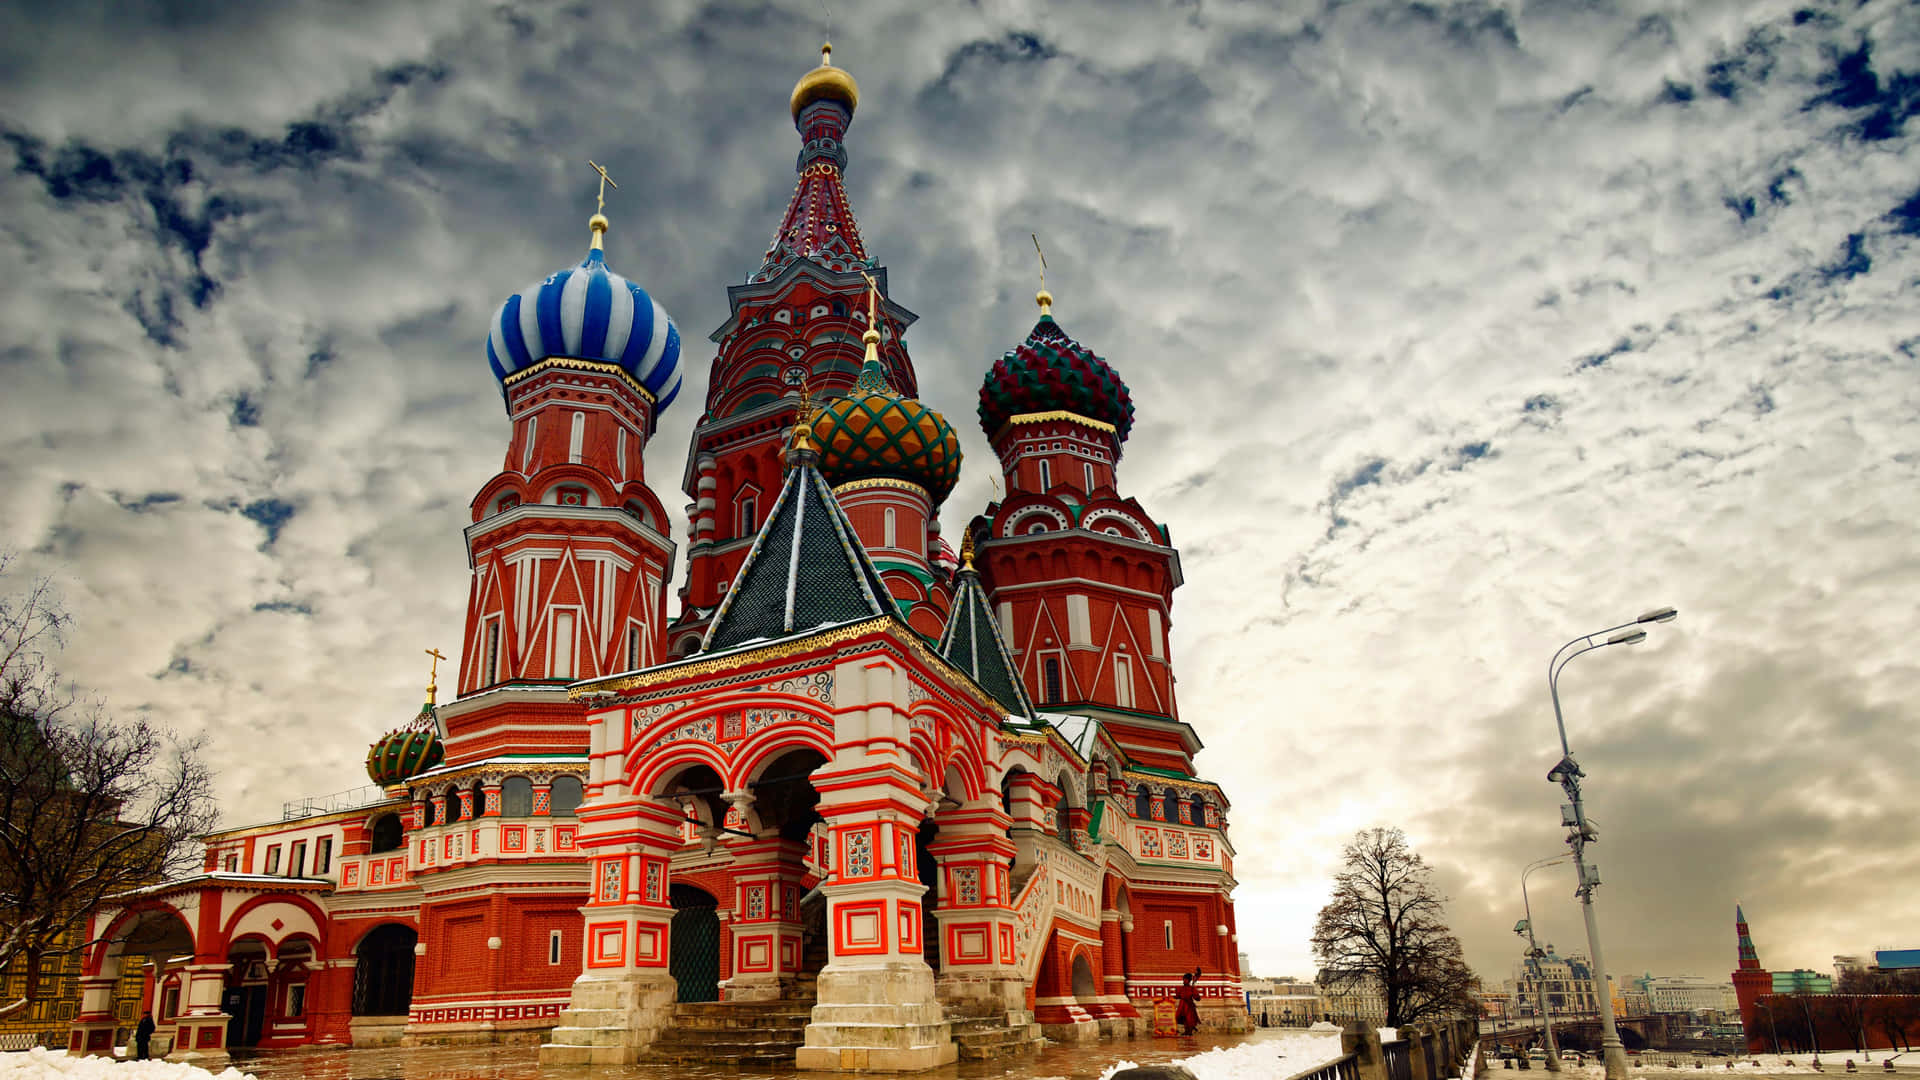 Caption: The majestic Saint Basil's Cathedral under an overcast sky. Wallpaper